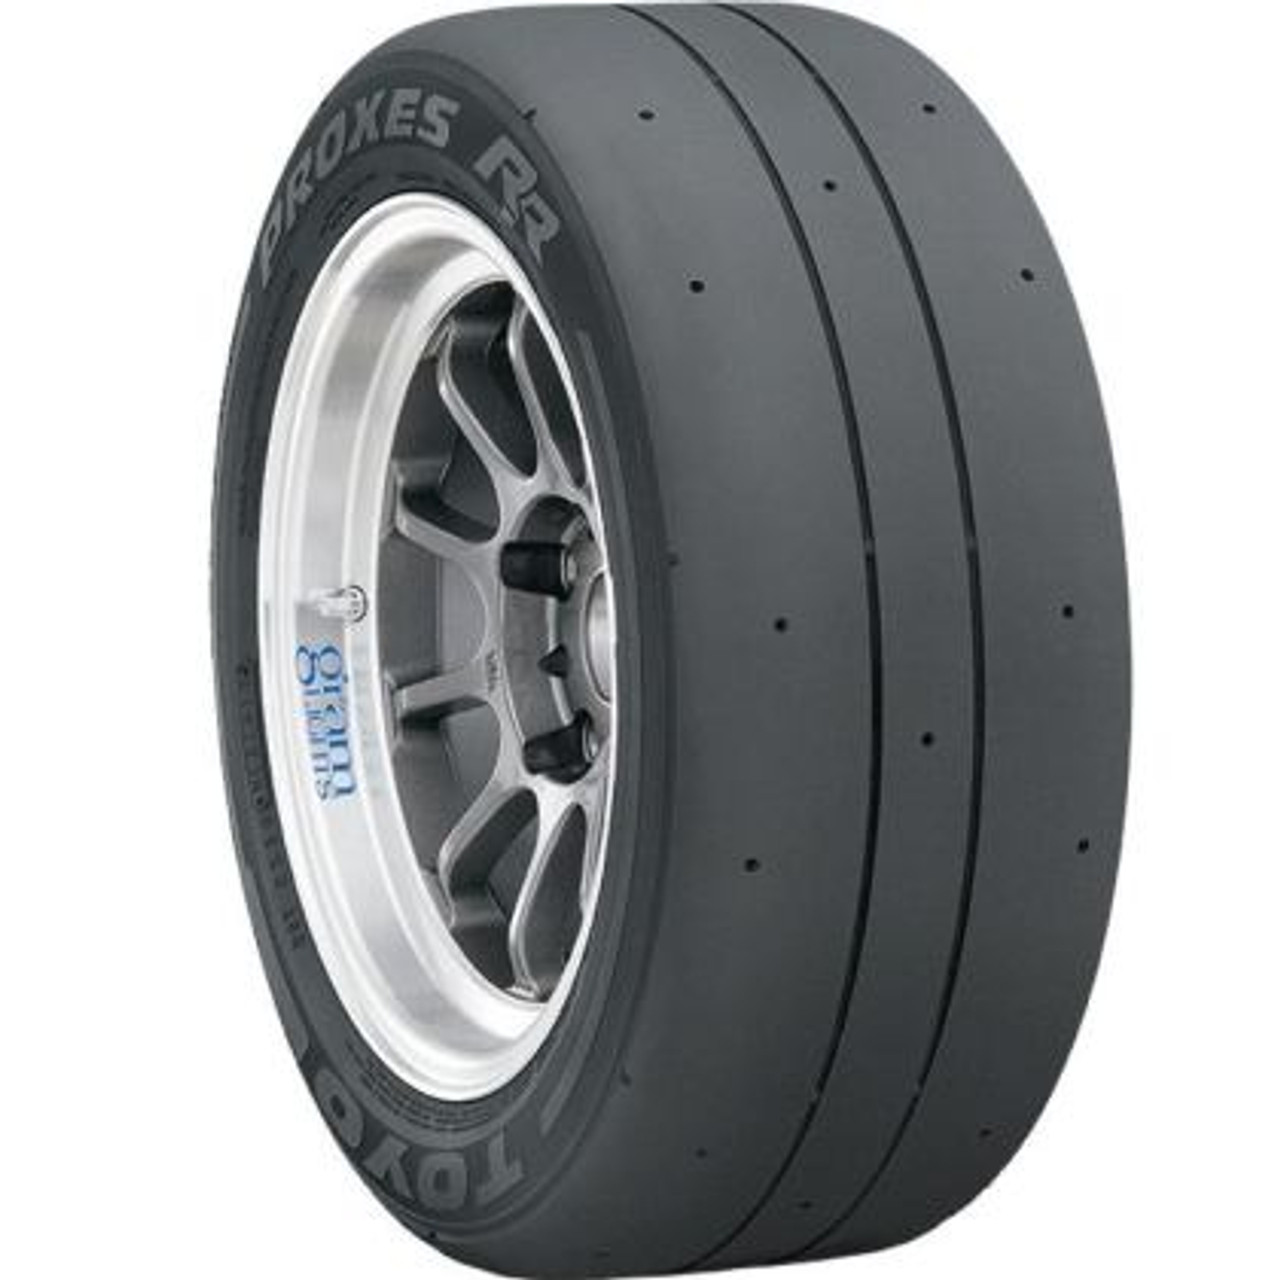 Toyo Proxes RR Tire - 235/40R17